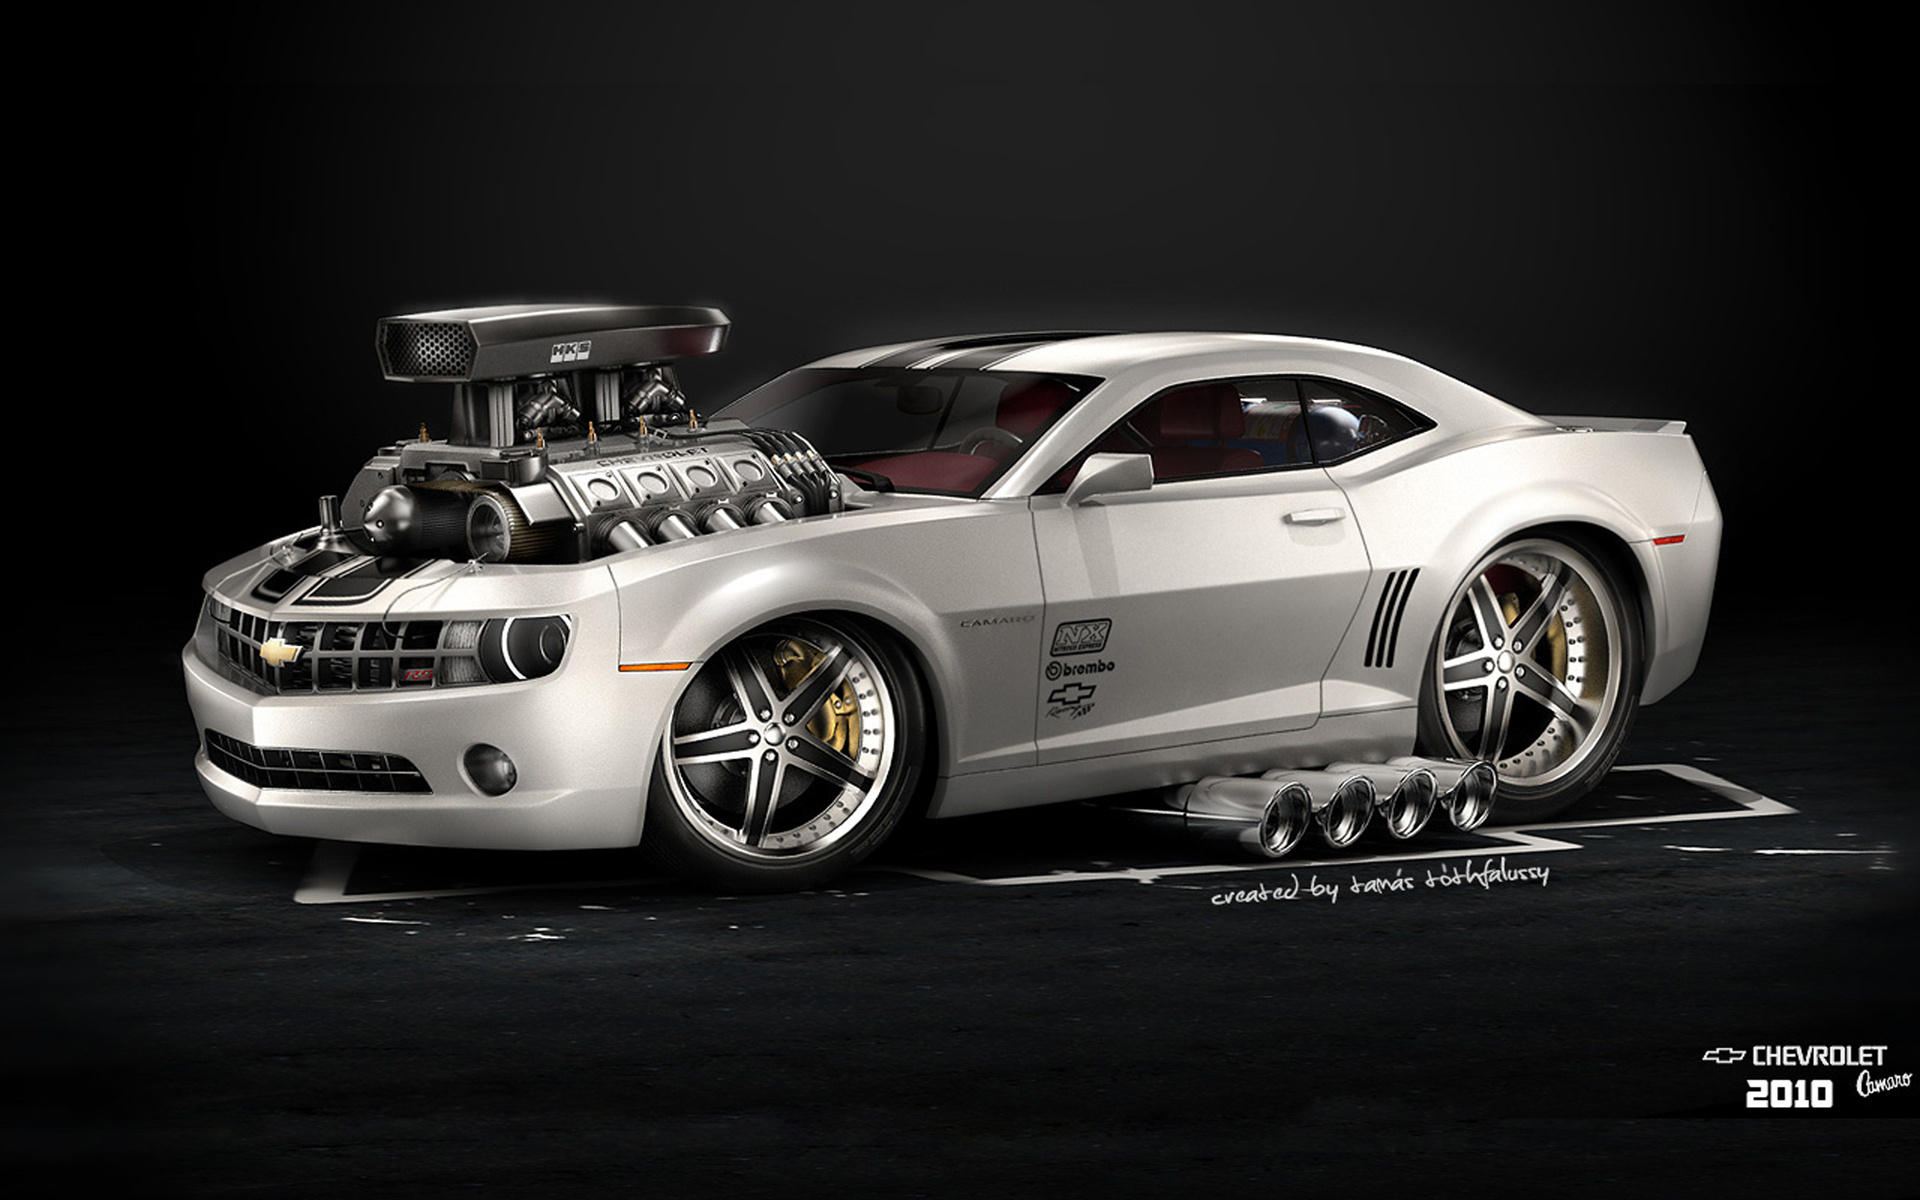 2010, Chevrolet, Camaro, Car, Hot, Rod, American, Muscle, Rods, Engine, Engines Wallpaper